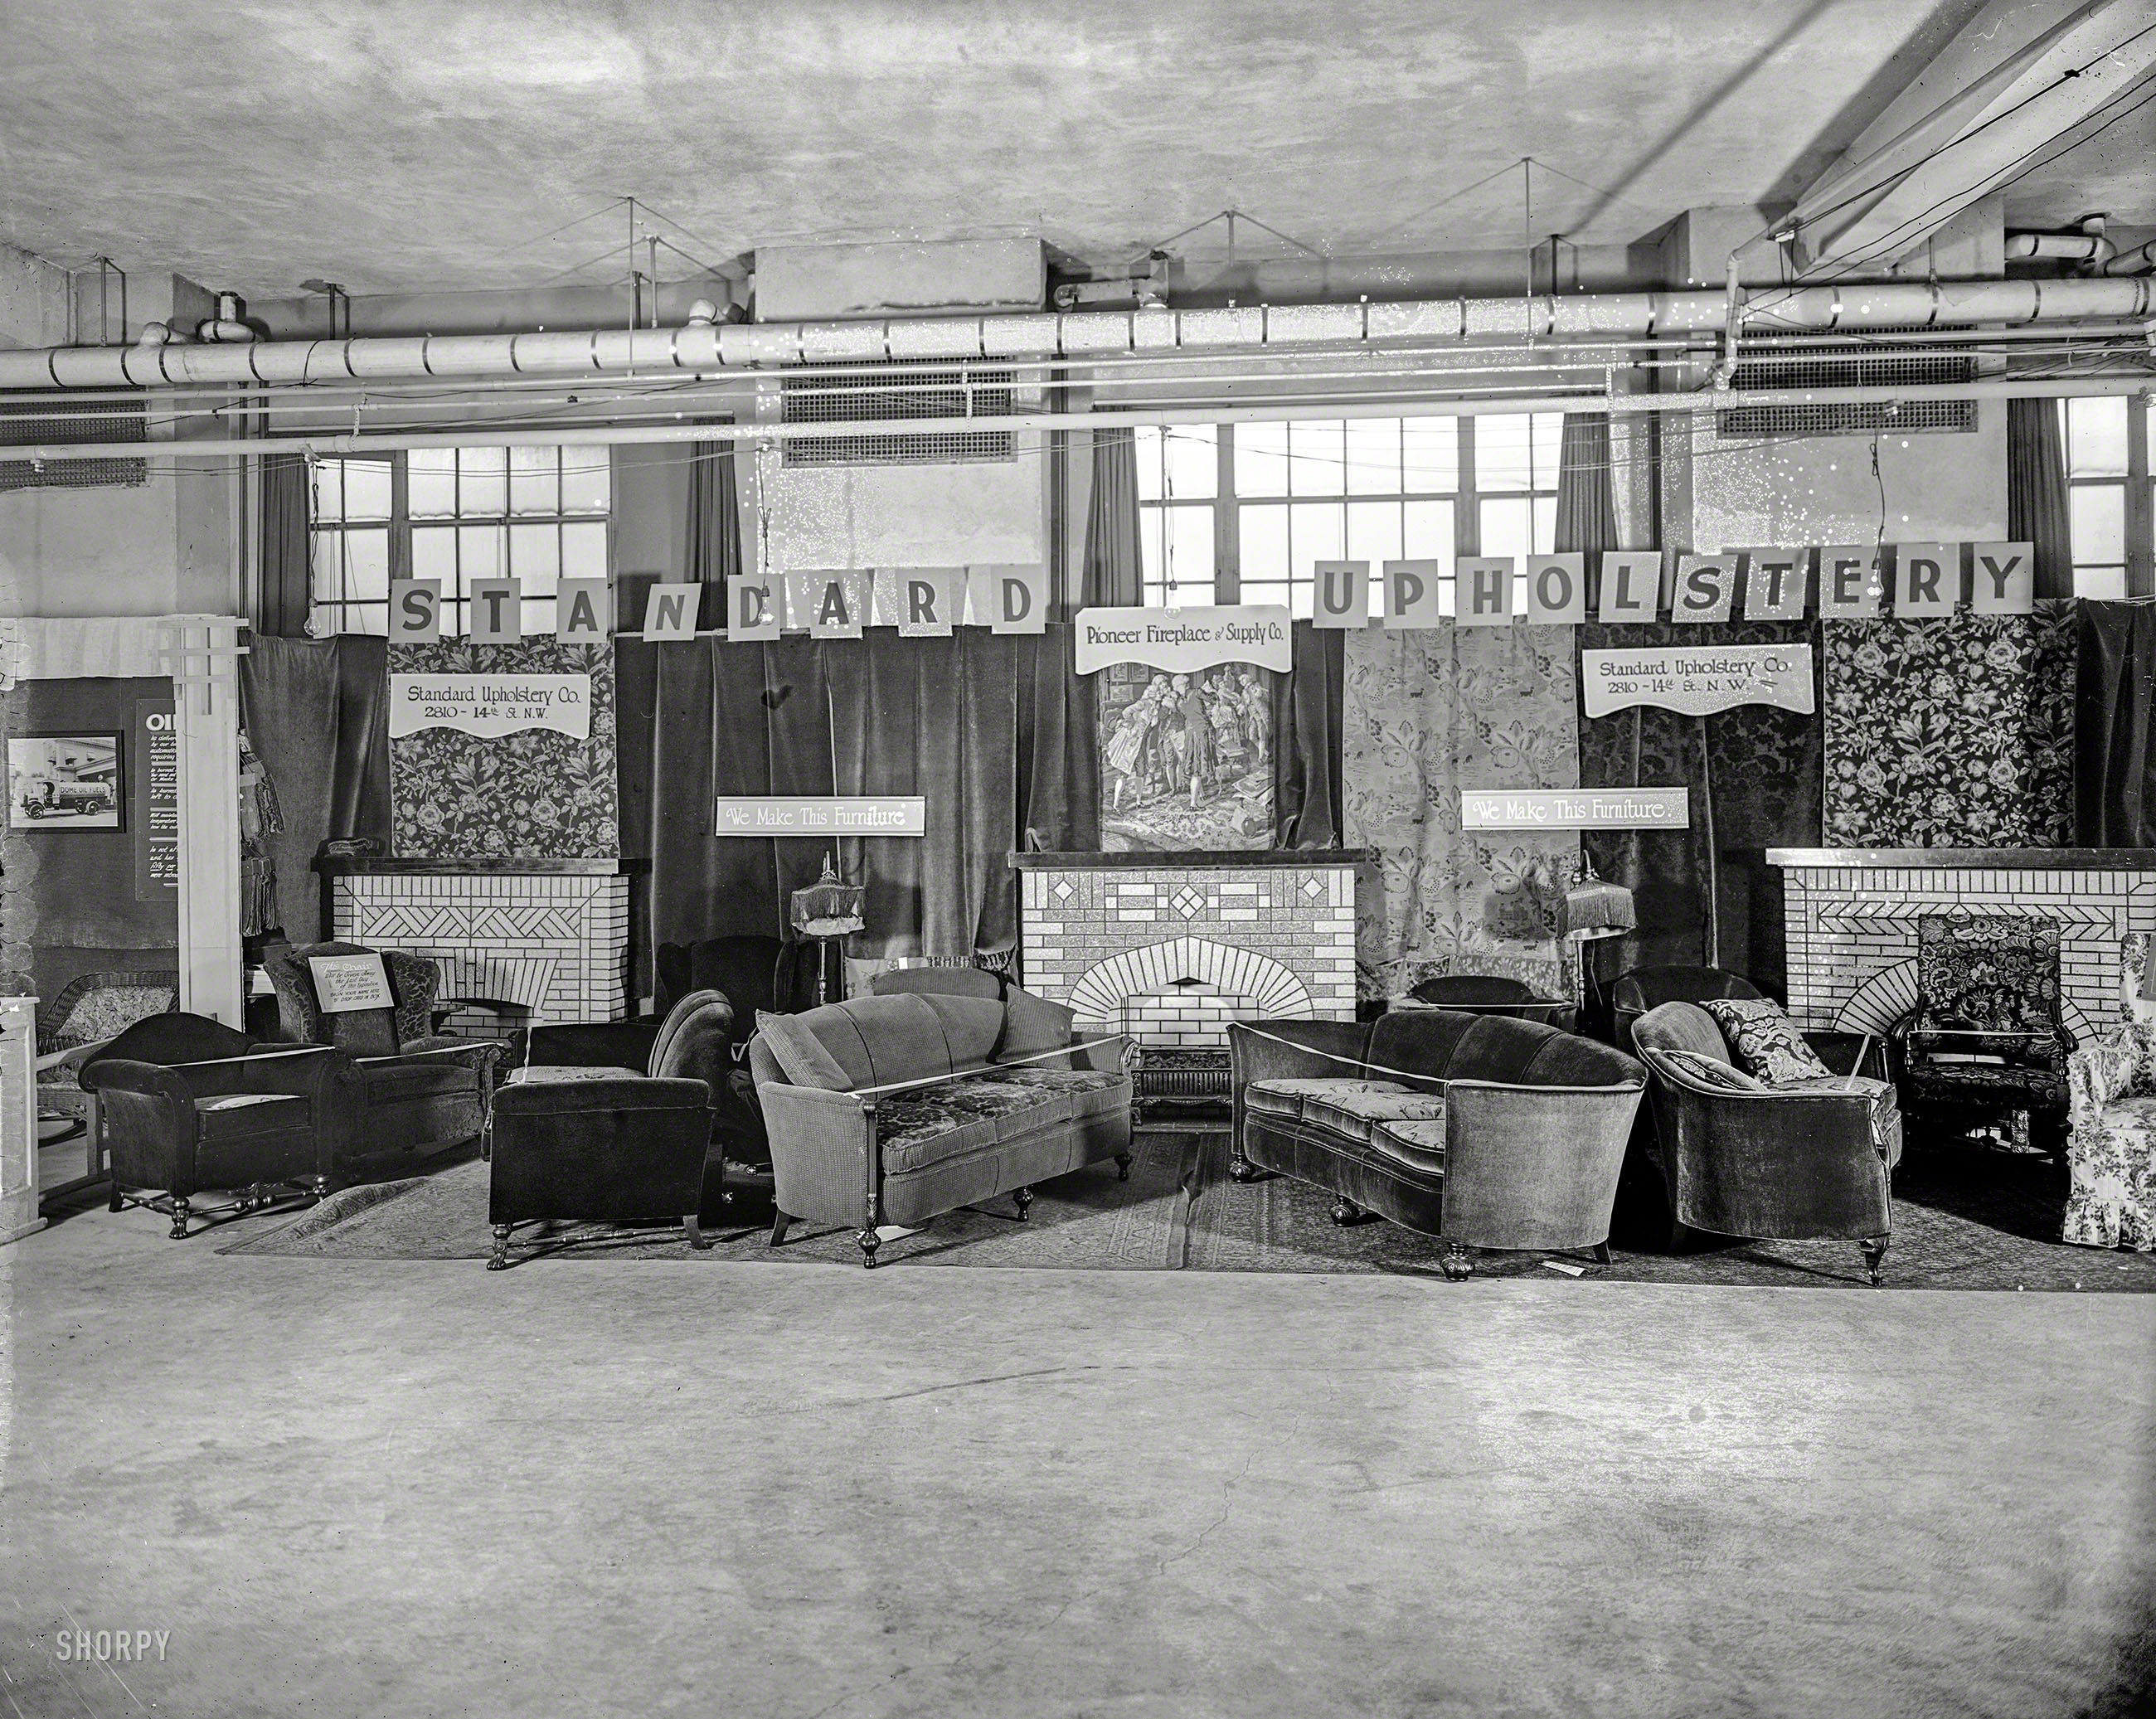 Washington, D.C. "Industrial exposition, 1926. Standard Upholstery Co." National Photo Company Collection glass negative. View full size.